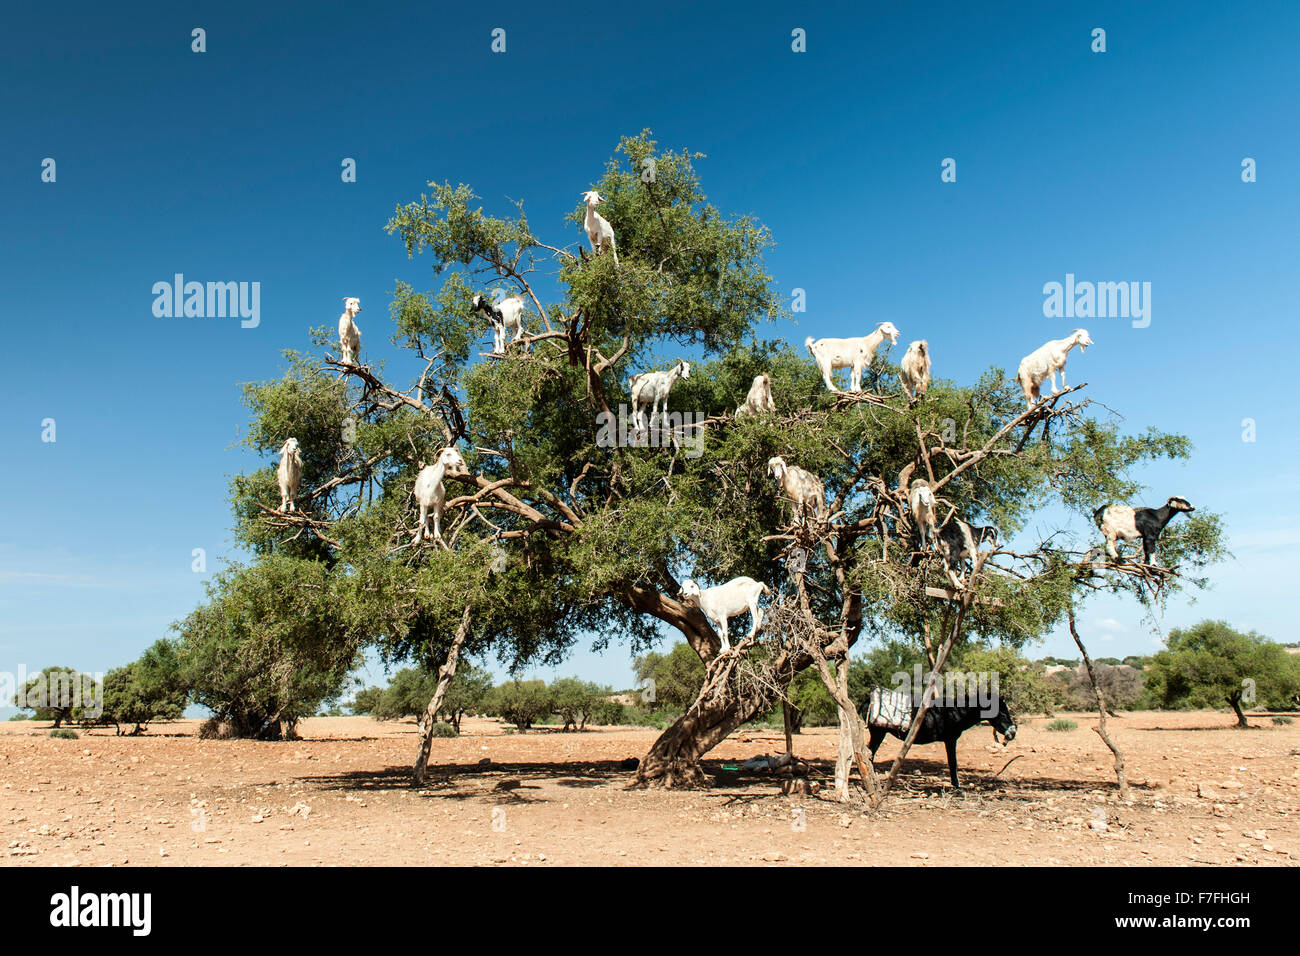 Goats in a tree on the Marrakech to Essaouira road in Morocco. Stock Photo